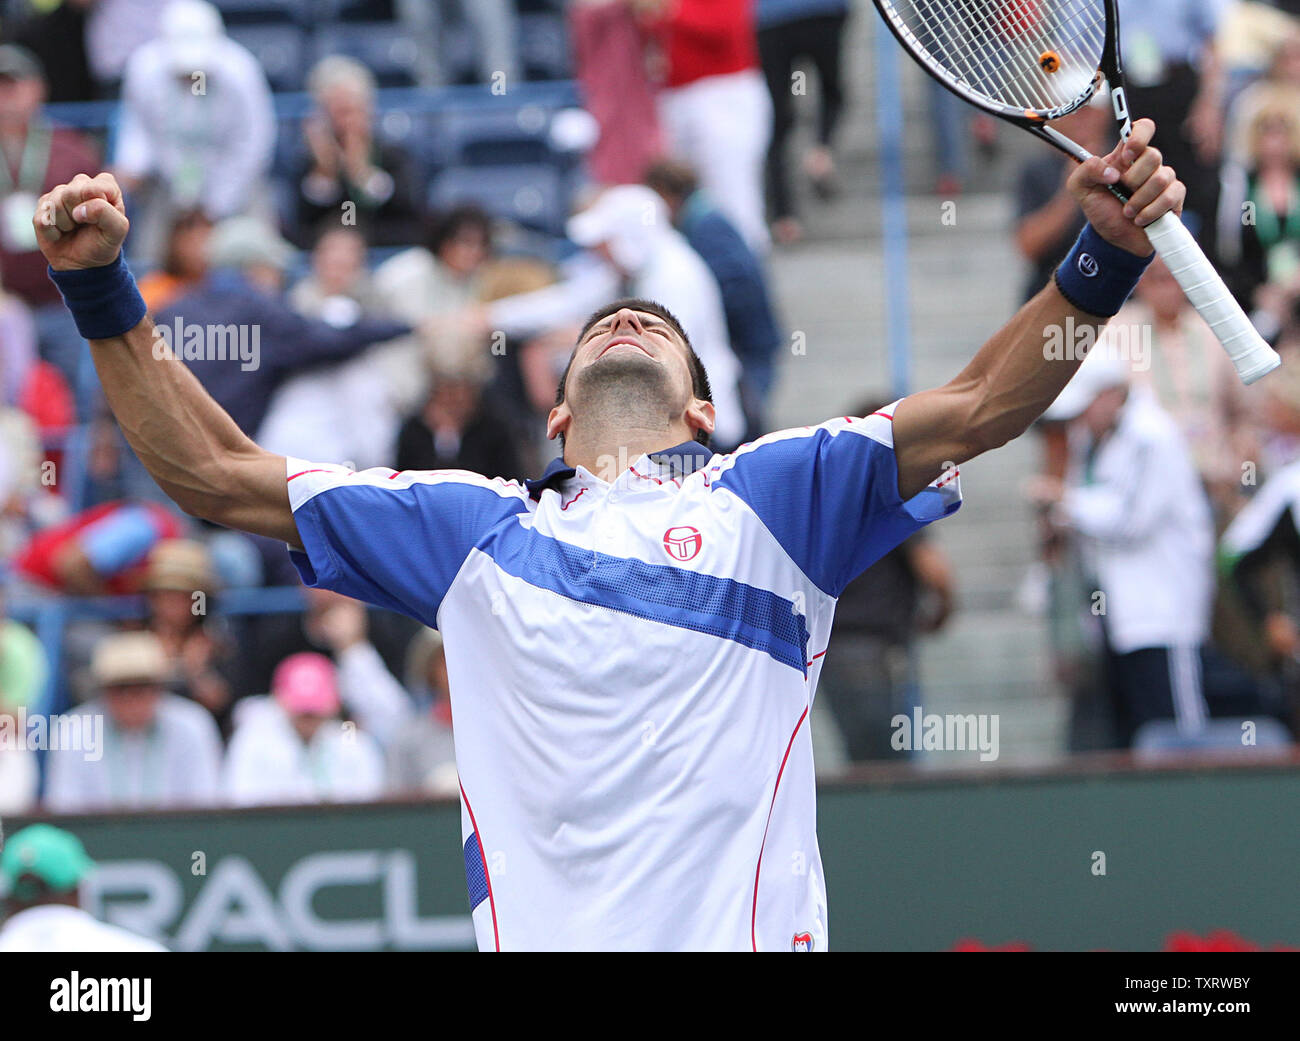 Serbian Novak Djokovic reacts after winning his mens final match against Spaniard Rafael Nadal at the BNP Paribas Open in Indian Wells, California on March 20, 2011.  Djokovic defeated Nadal 4-6, 6-3, 6-2 to win the tournament.   UPI/David Silpa Stock Photo